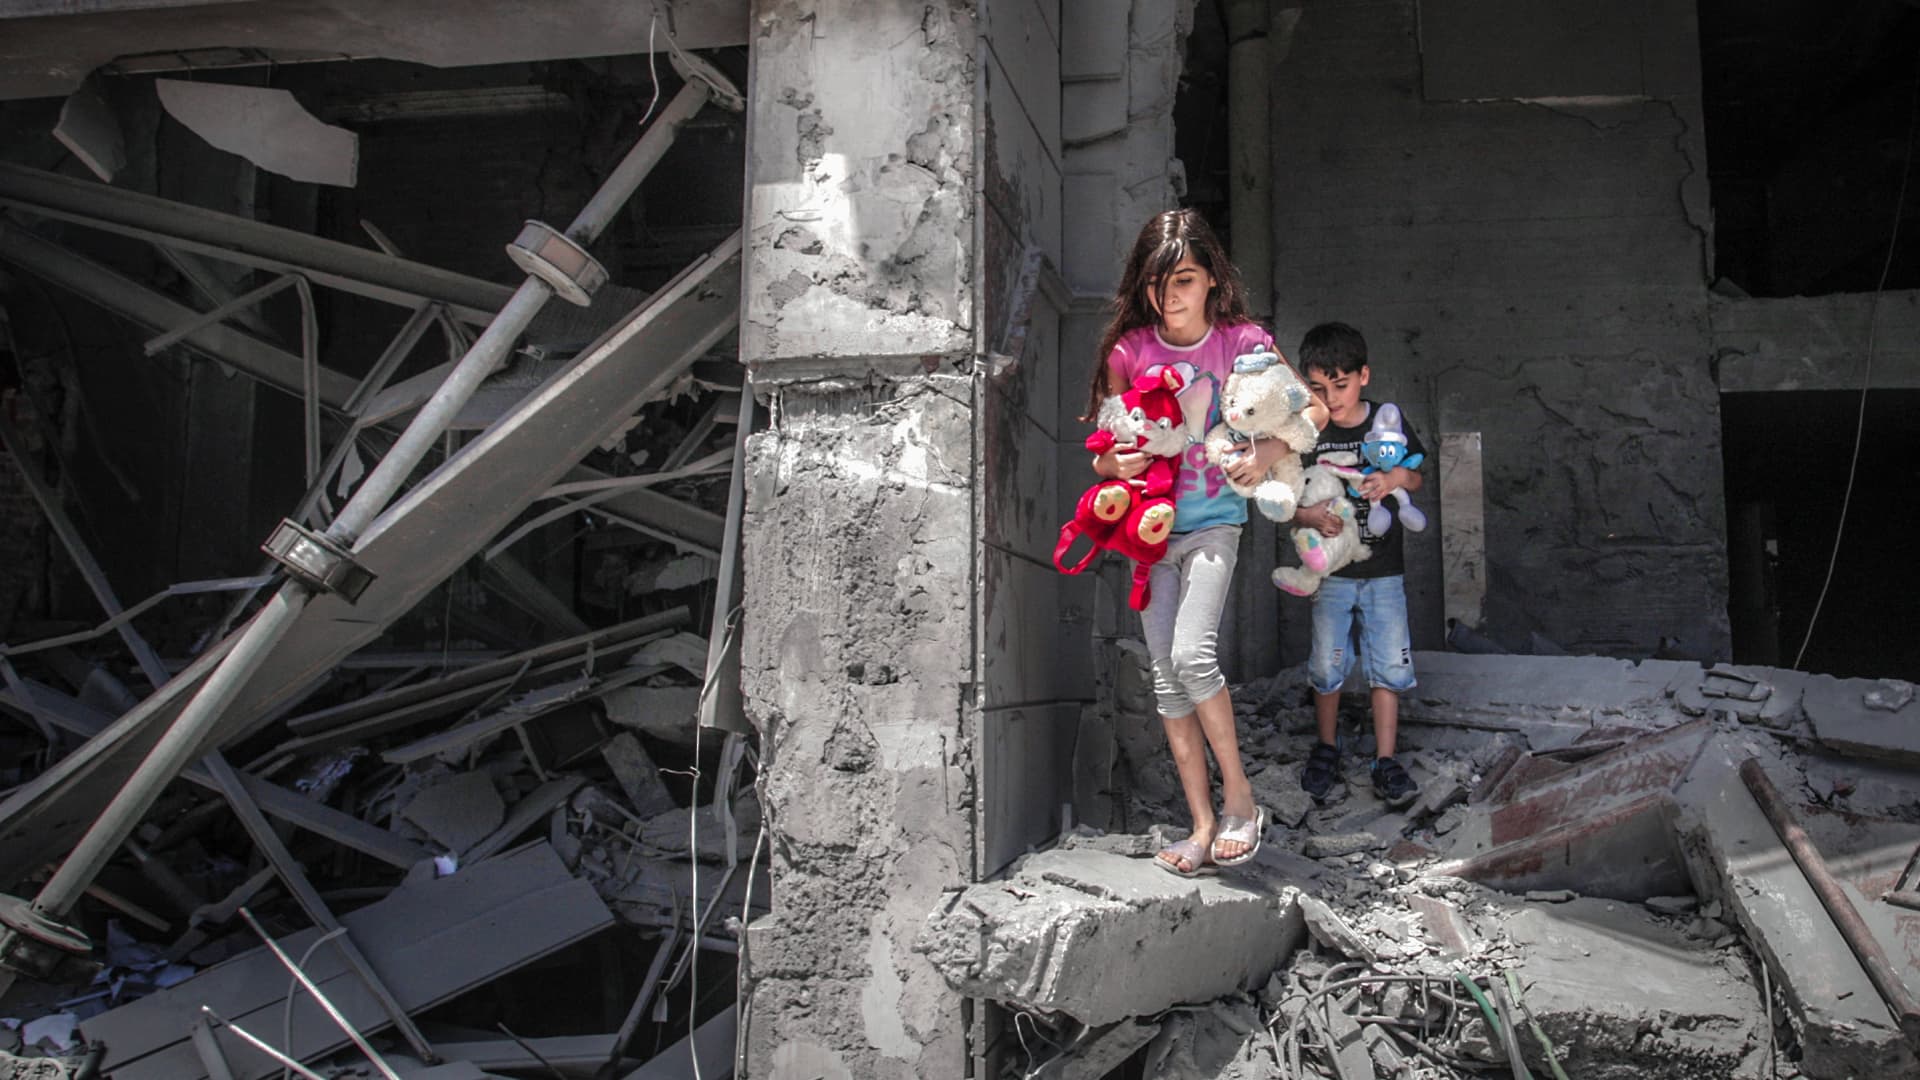 Palestinian children salvage toys from their home at the Al-Jawhara Tower in Gaza City, on May 17, 2021, which was heavily damaged in Israeli airstrikes.